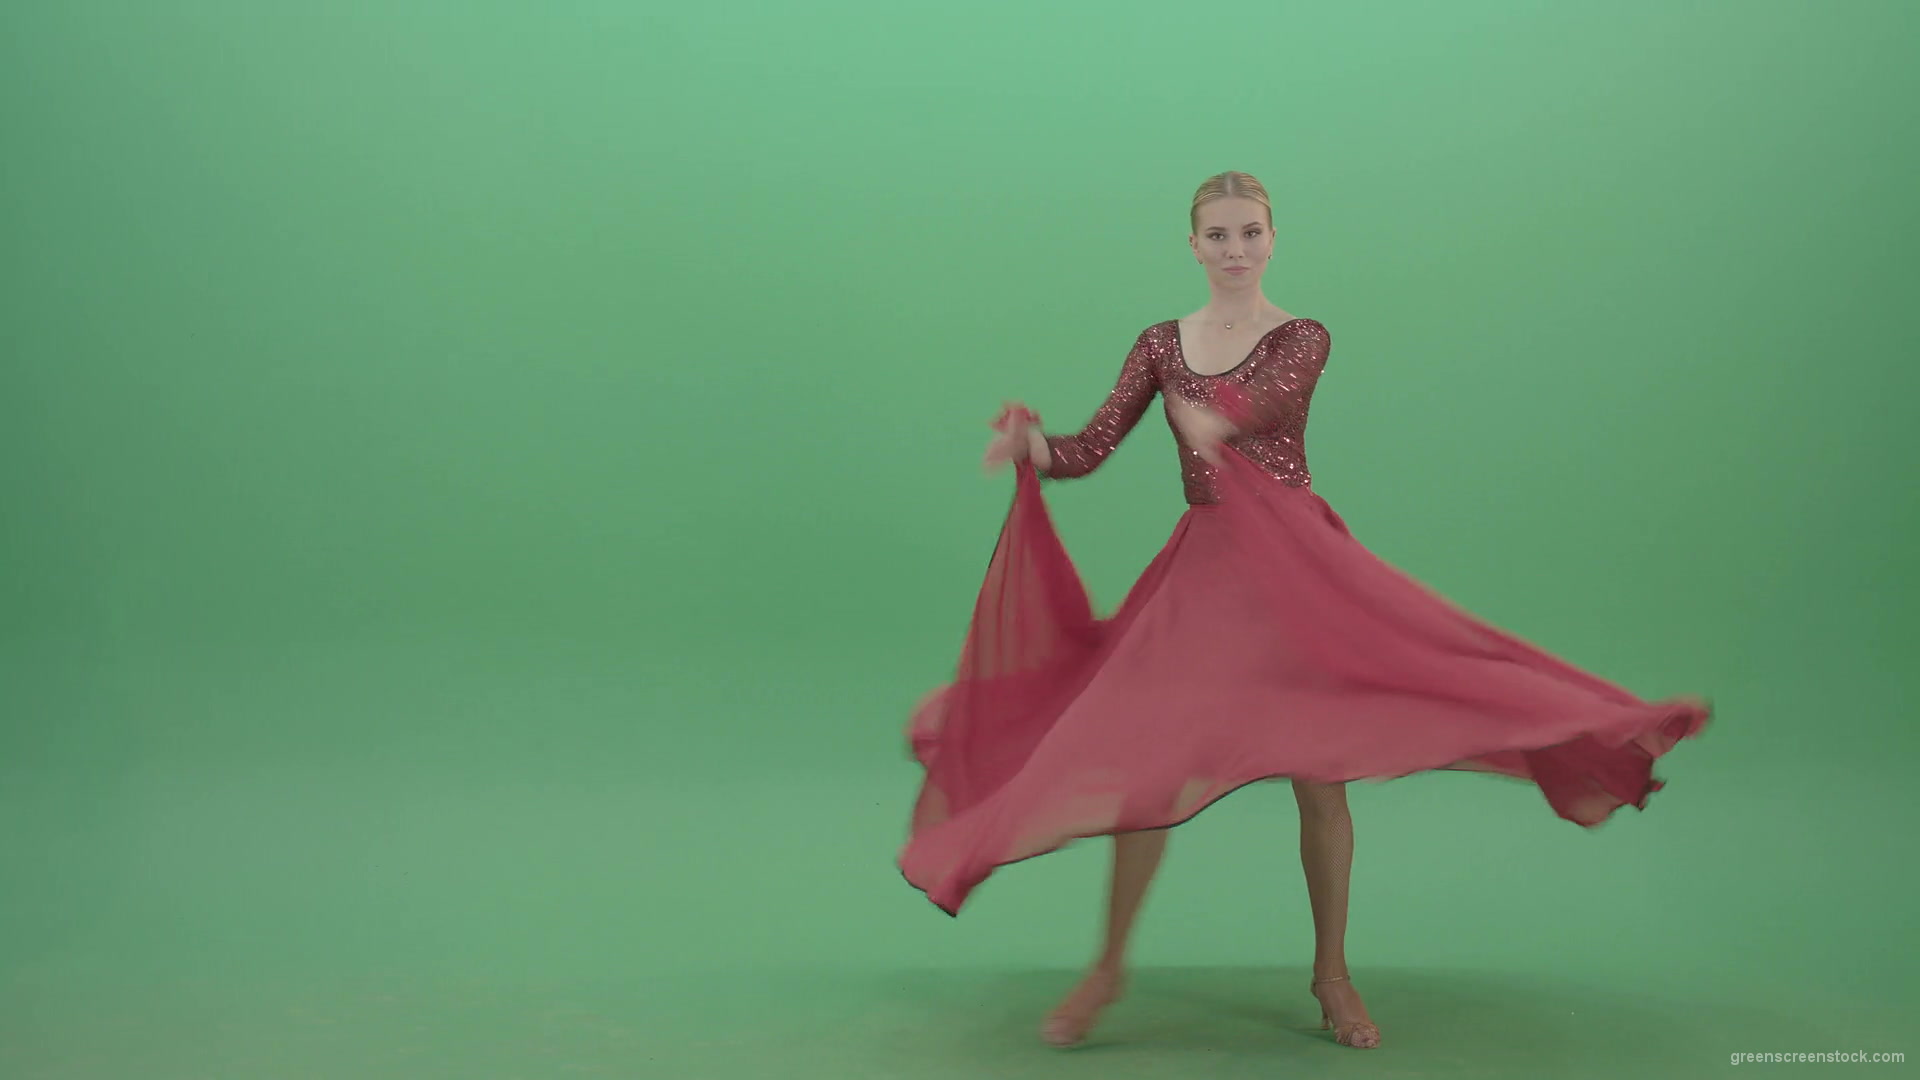 Elegant-woman-in-red-ballroom-dress-spinning-and-clapping-in-hands-isolated-on-green-screen-4K-Video-Footage-1920_004 Green Screen Stock